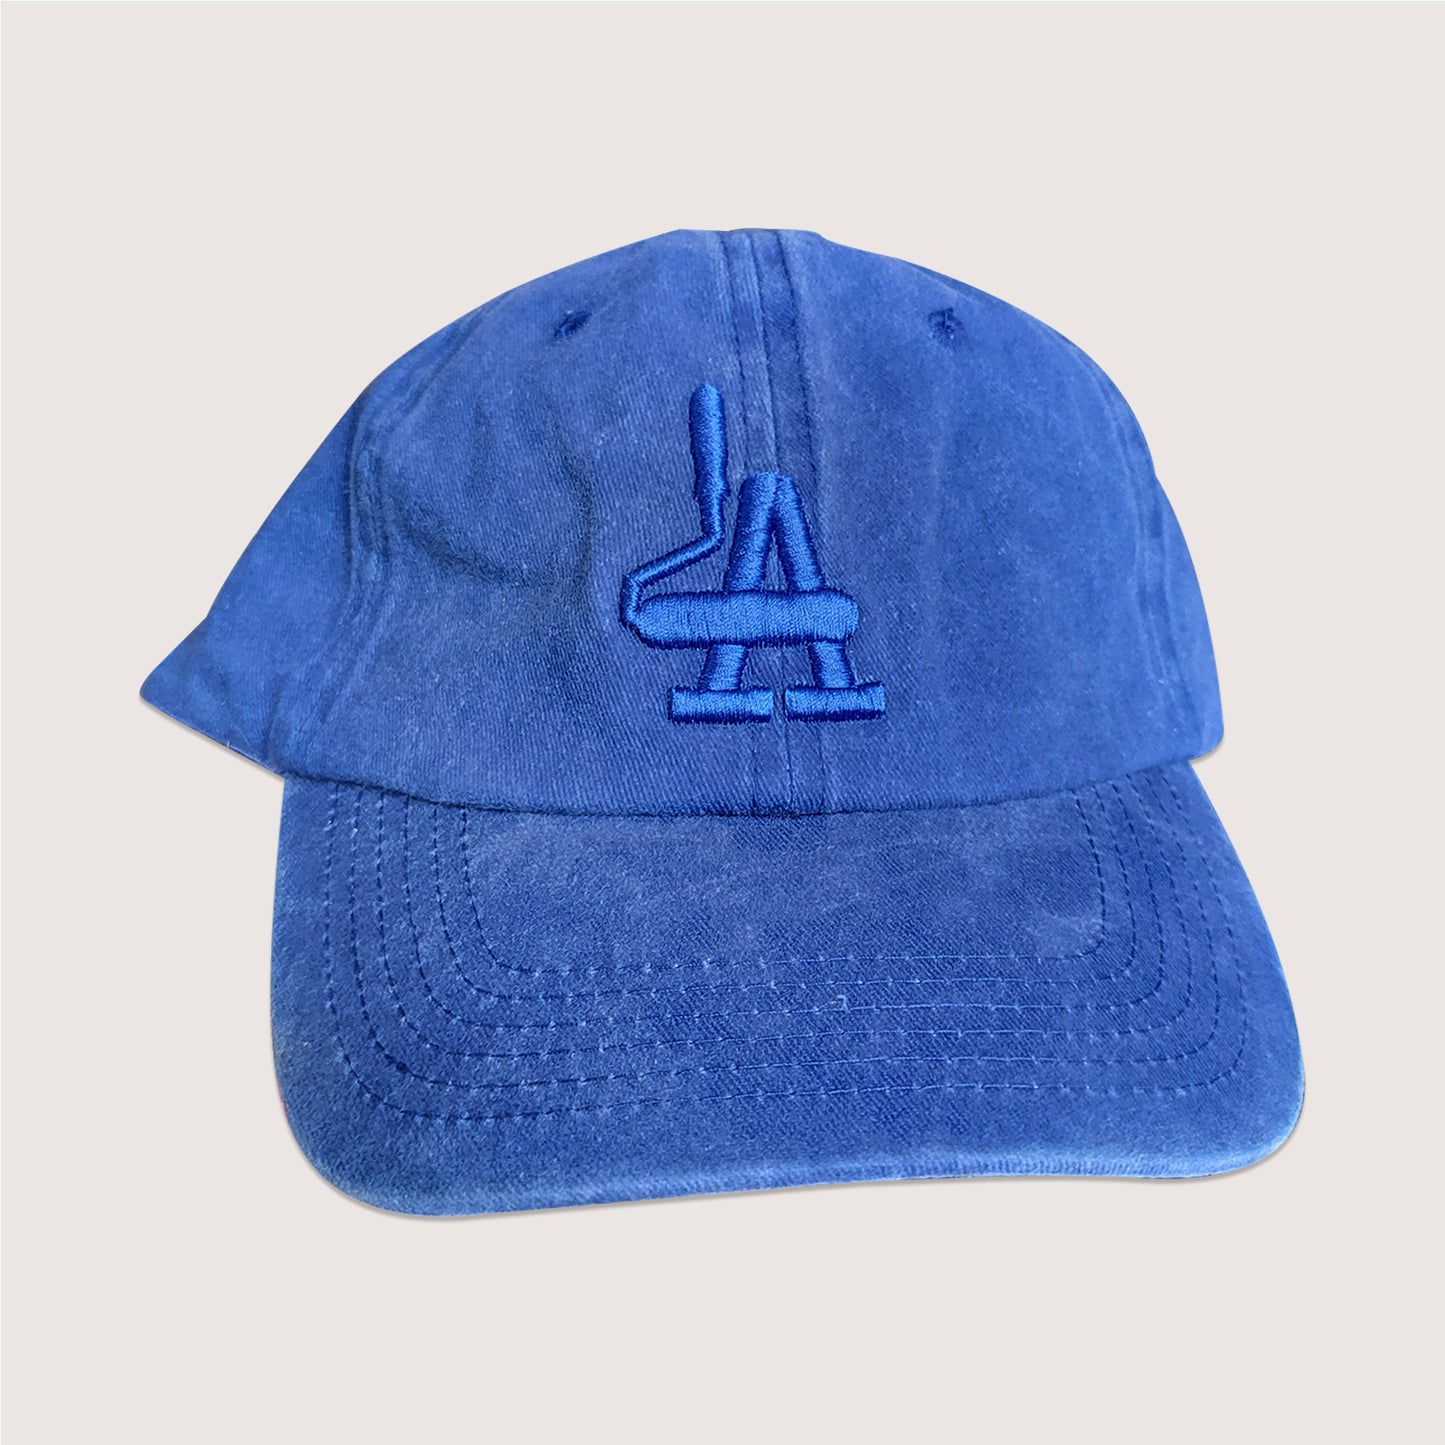 Local graffiti brand unstructured cap in dodger blue with blue puff embroidery detail.